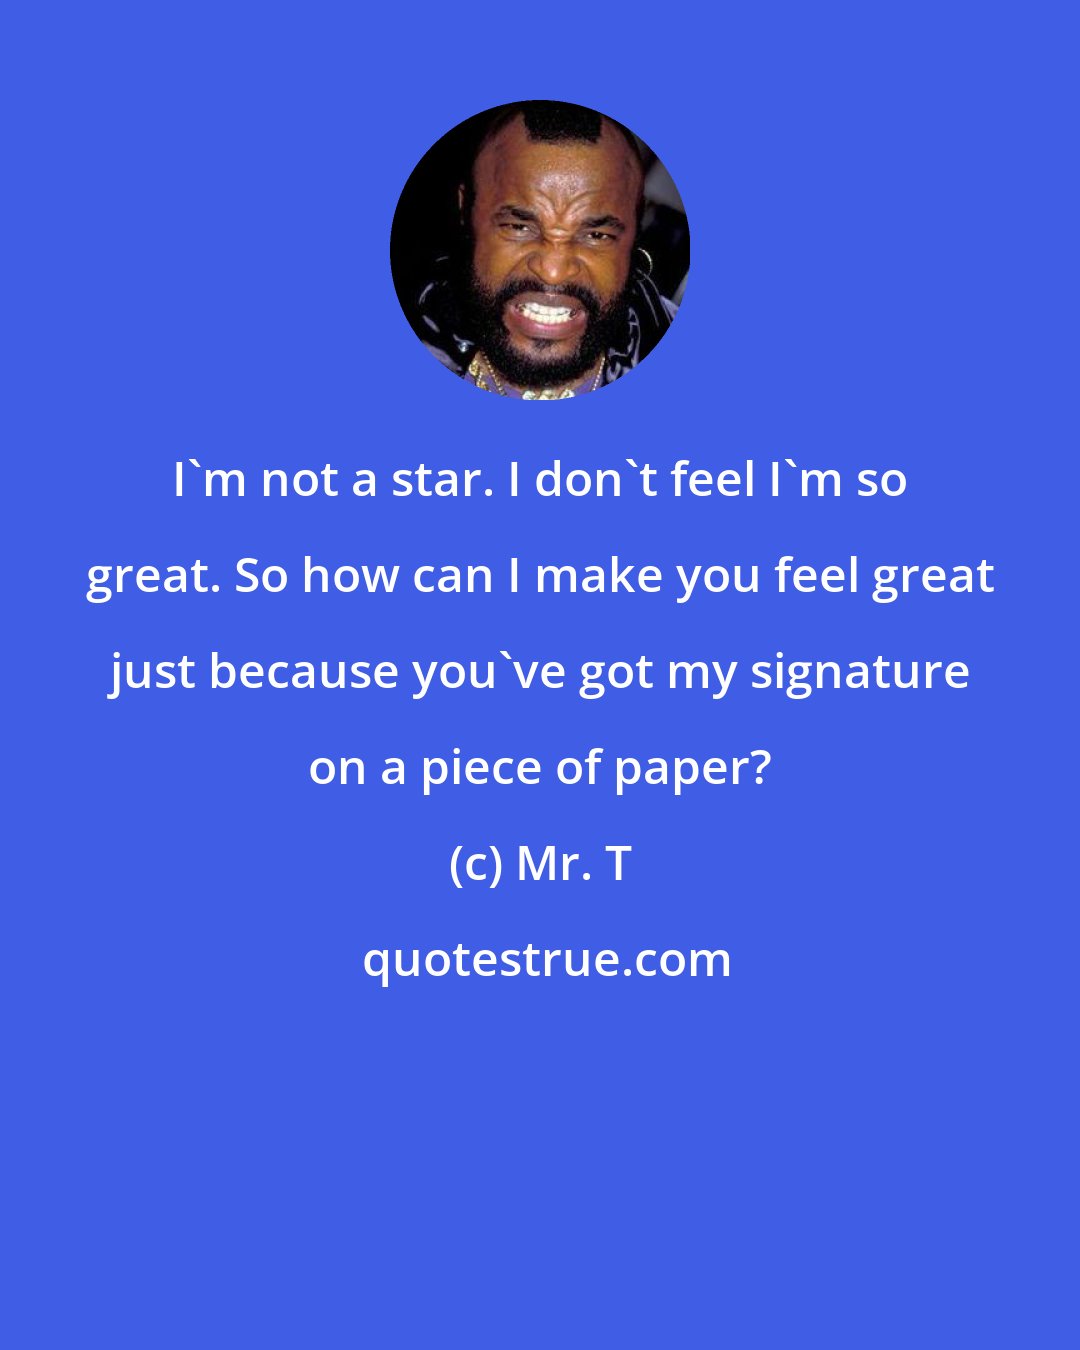 Mr. T: I'm not a star. I don't feel I'm so great. So how can I make you feel great just because you've got my signature on a piece of paper?